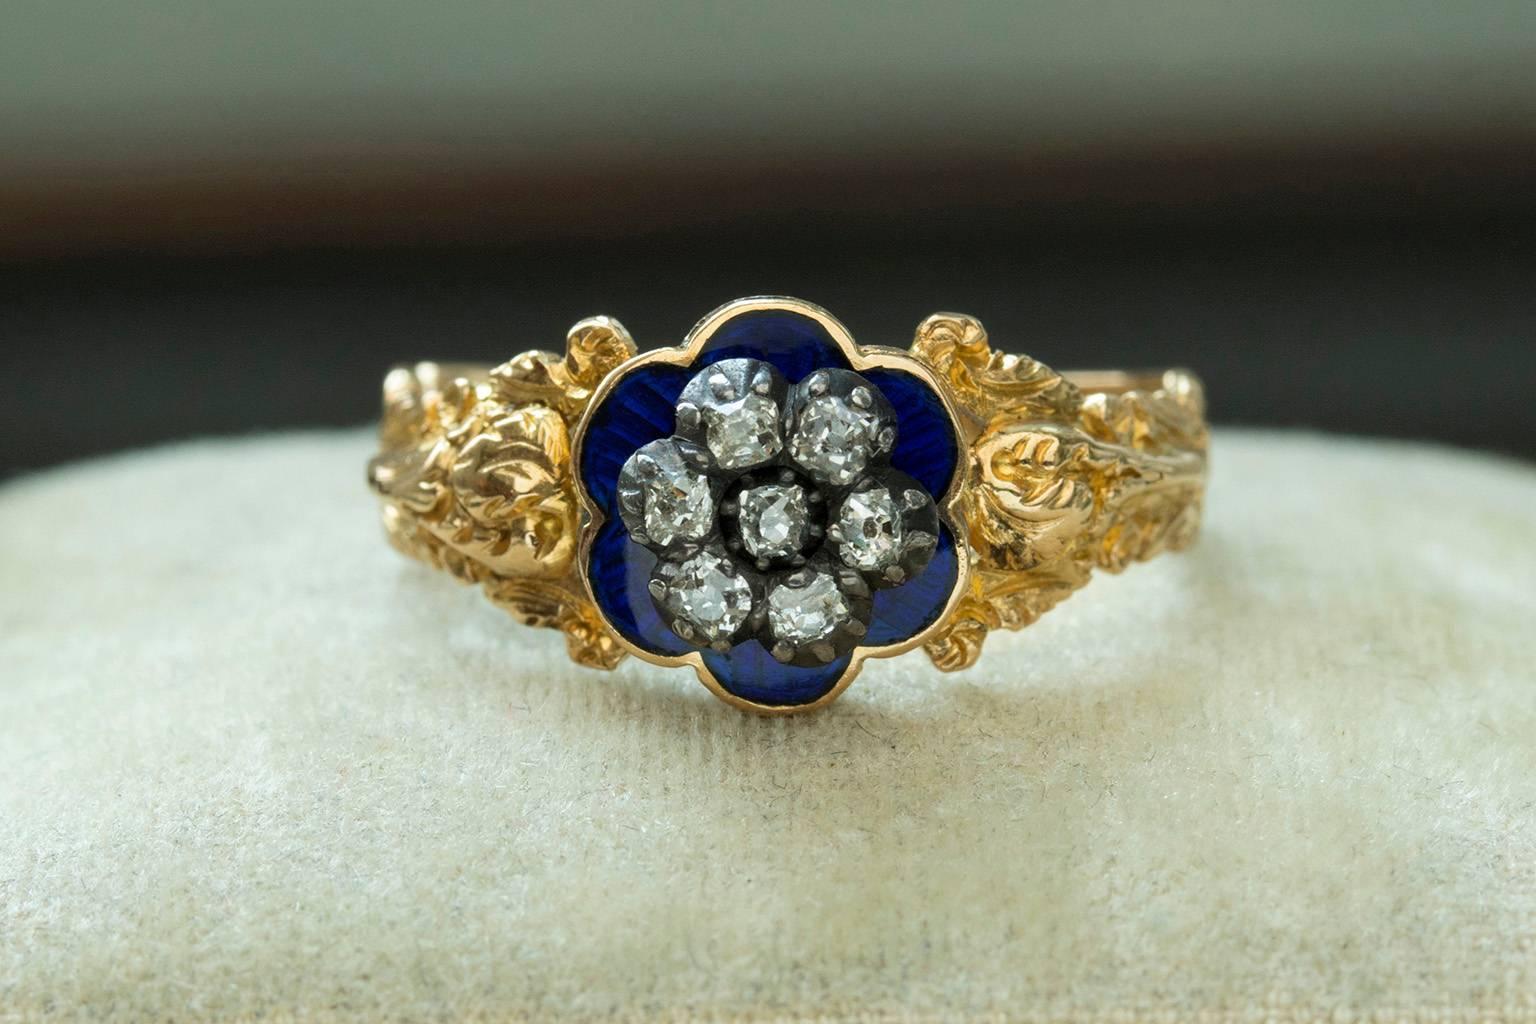 C.1828. A Georgian blue enamel and diamond ring. The center face features 'forget-me-not' flower shaped diamonds over deep royal blue enamel setting. The ring has beautifully detailed shoulders with a motif of flowers and leaves. There is an